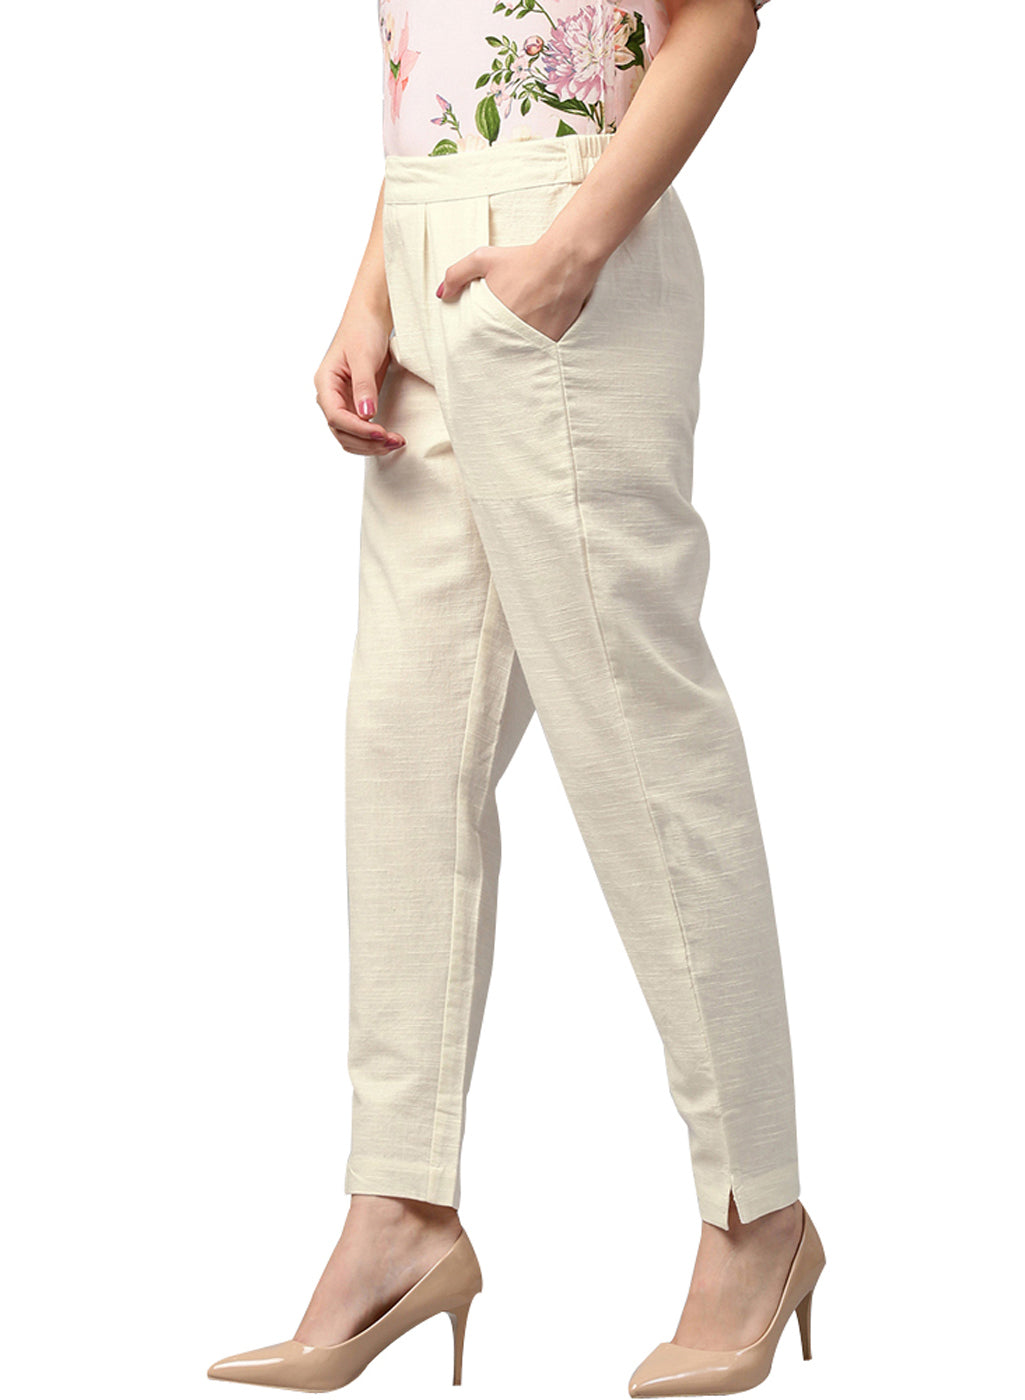 Get Ankle Length Pants for Women.